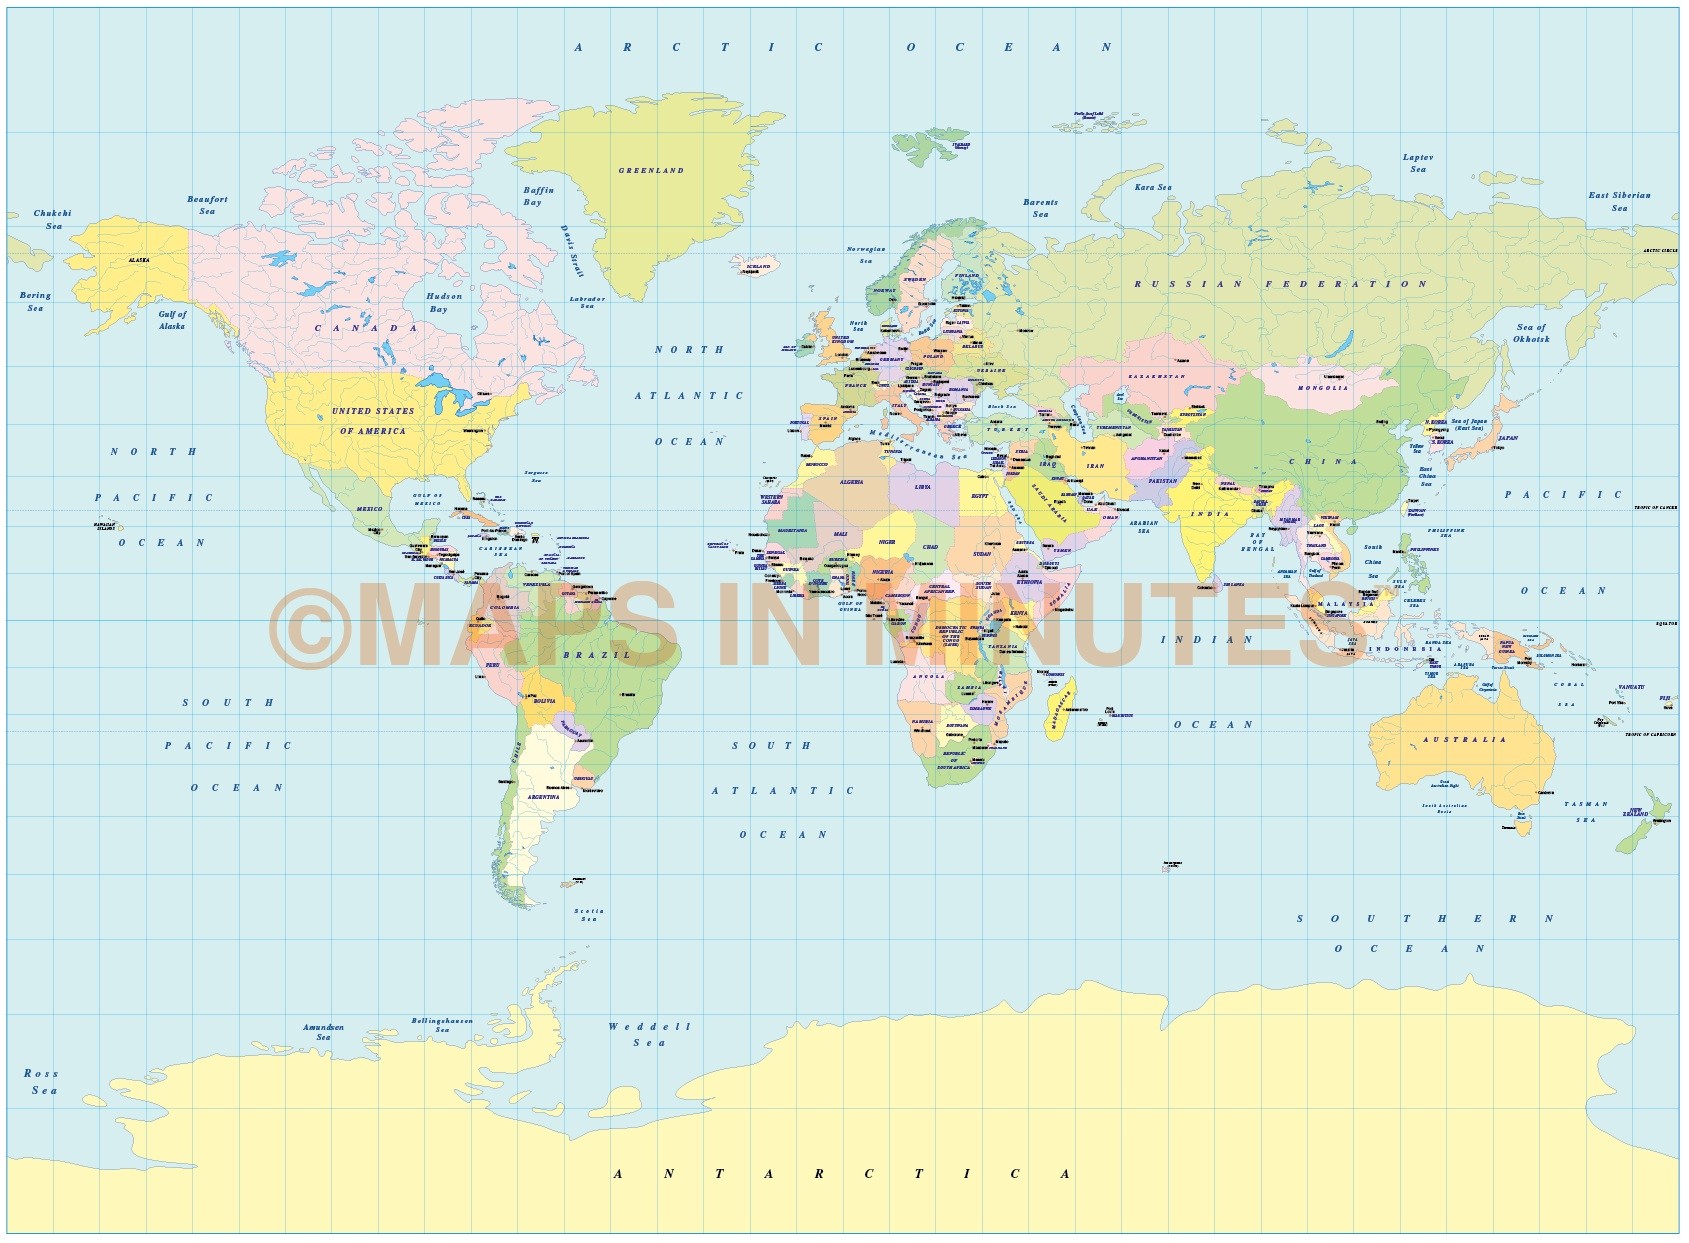 World GeoPolitical Small Scale Map Collection 10 Map